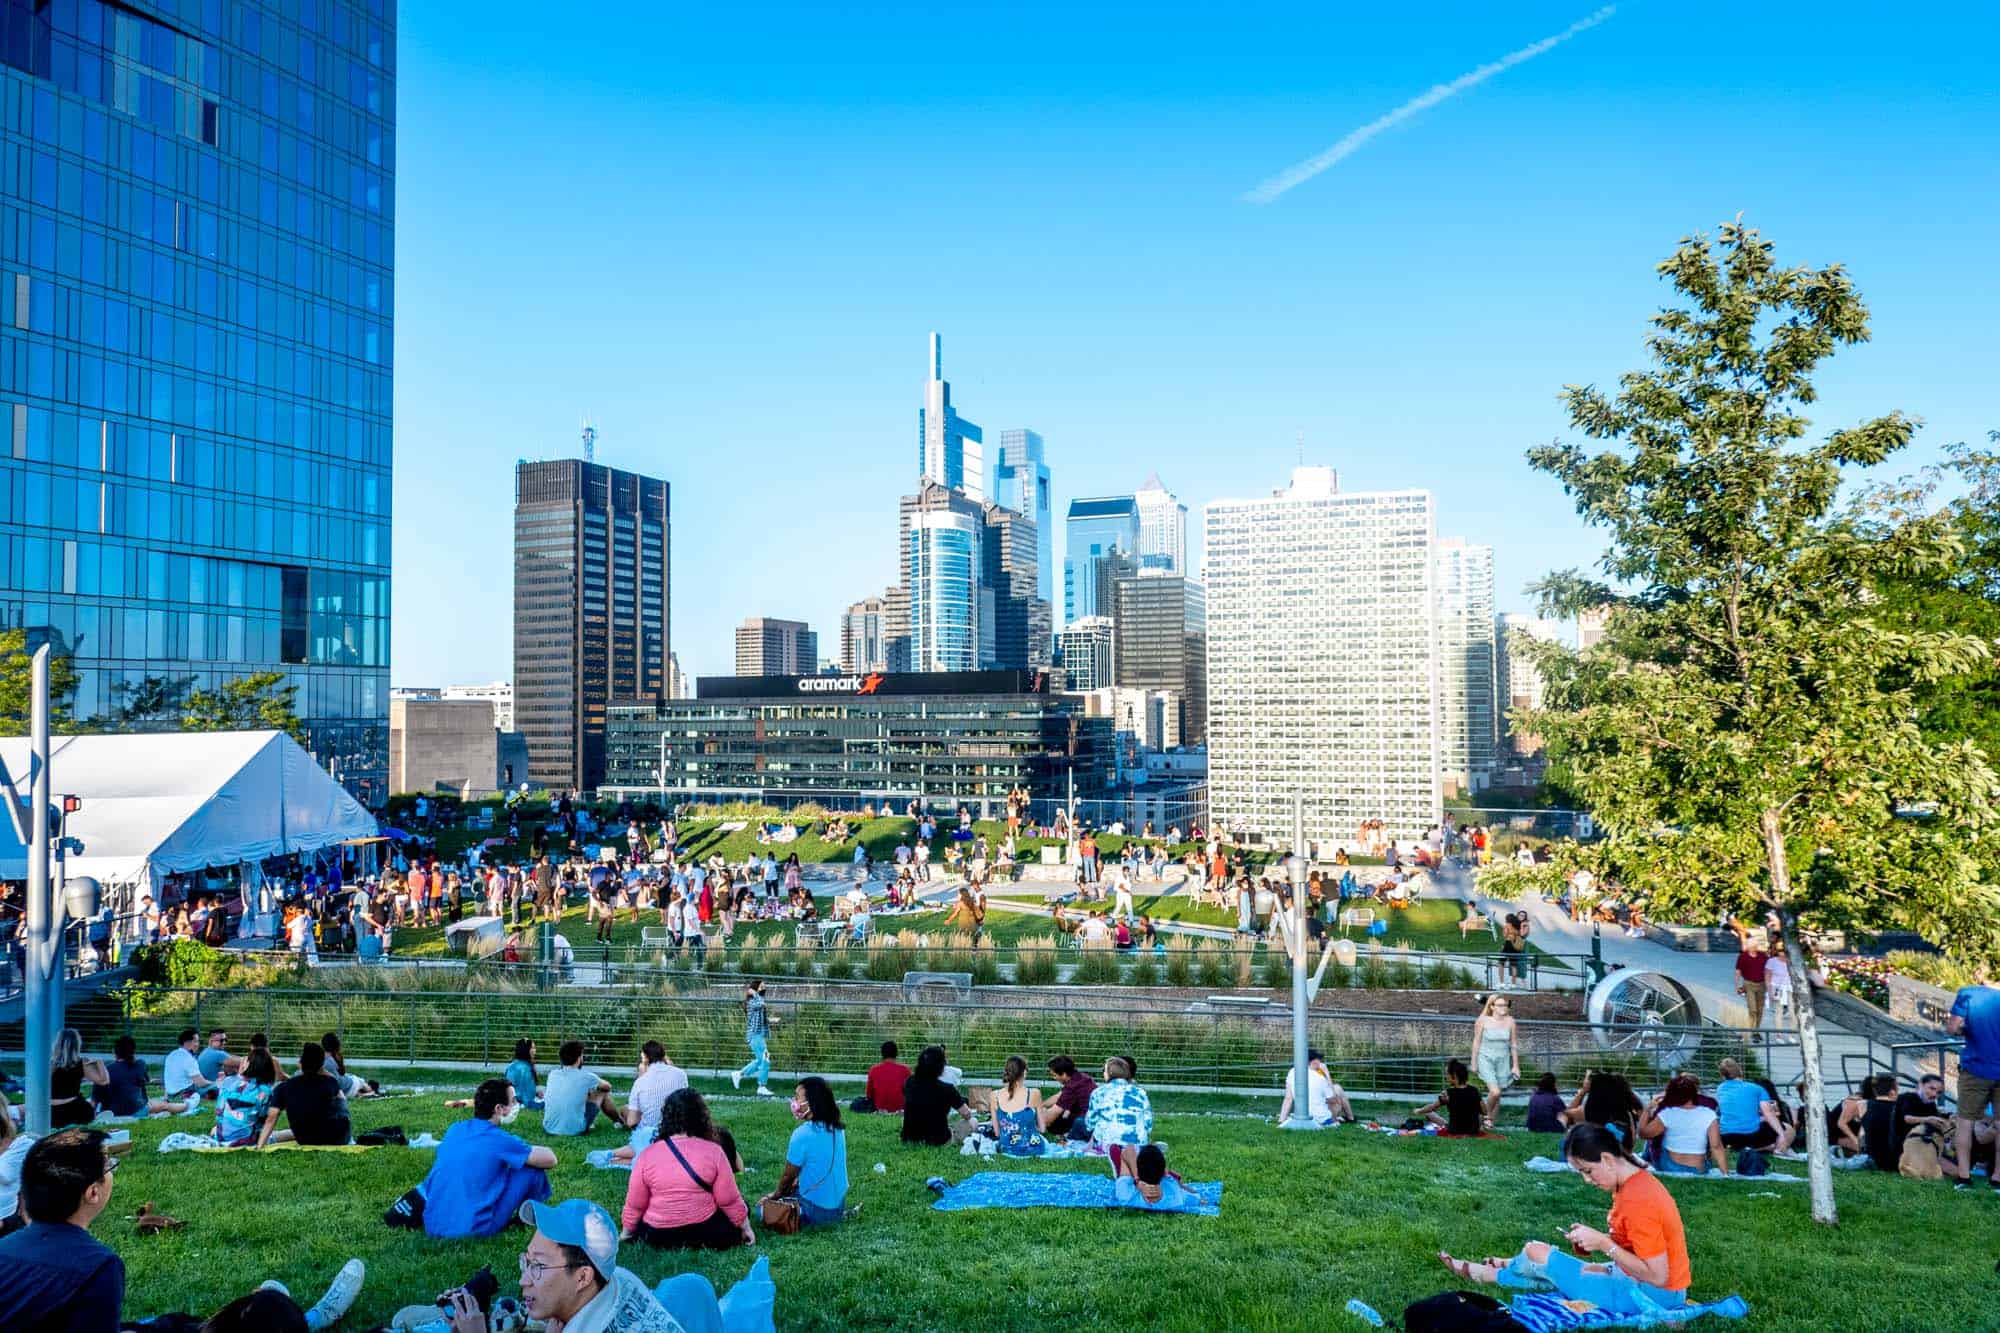 Many people scattered across the grass at a rooftop park with skyscrapers in the distance